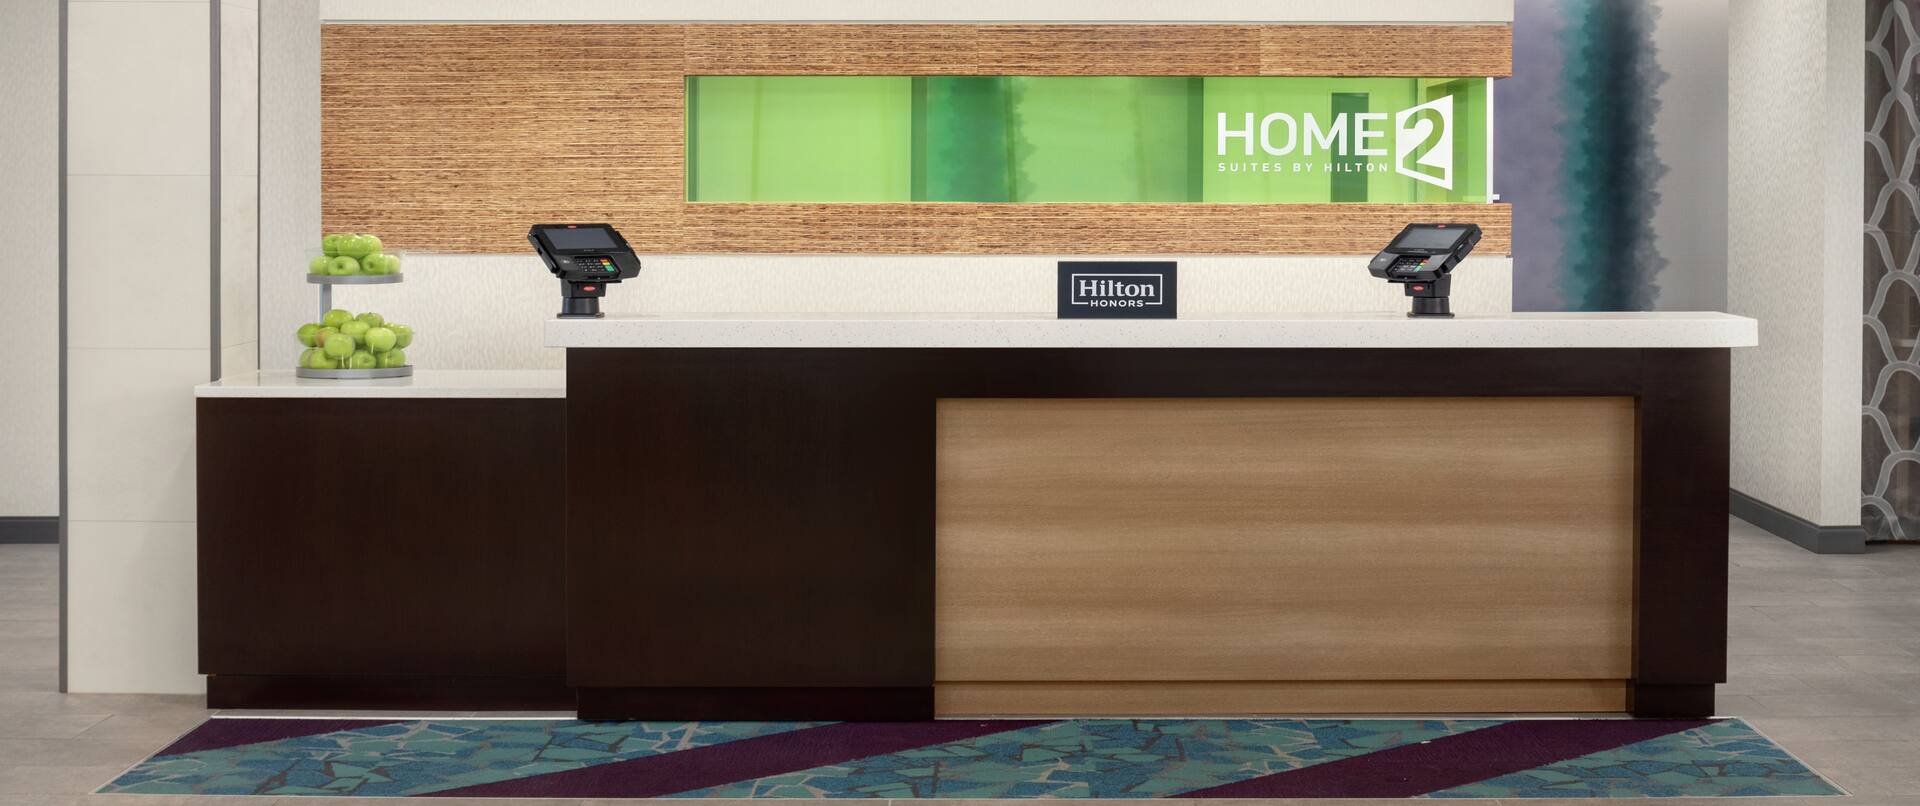 Welcoming front desk in hotel lobby featuring hilton honors sign, lowered accessible desk, and green apples.